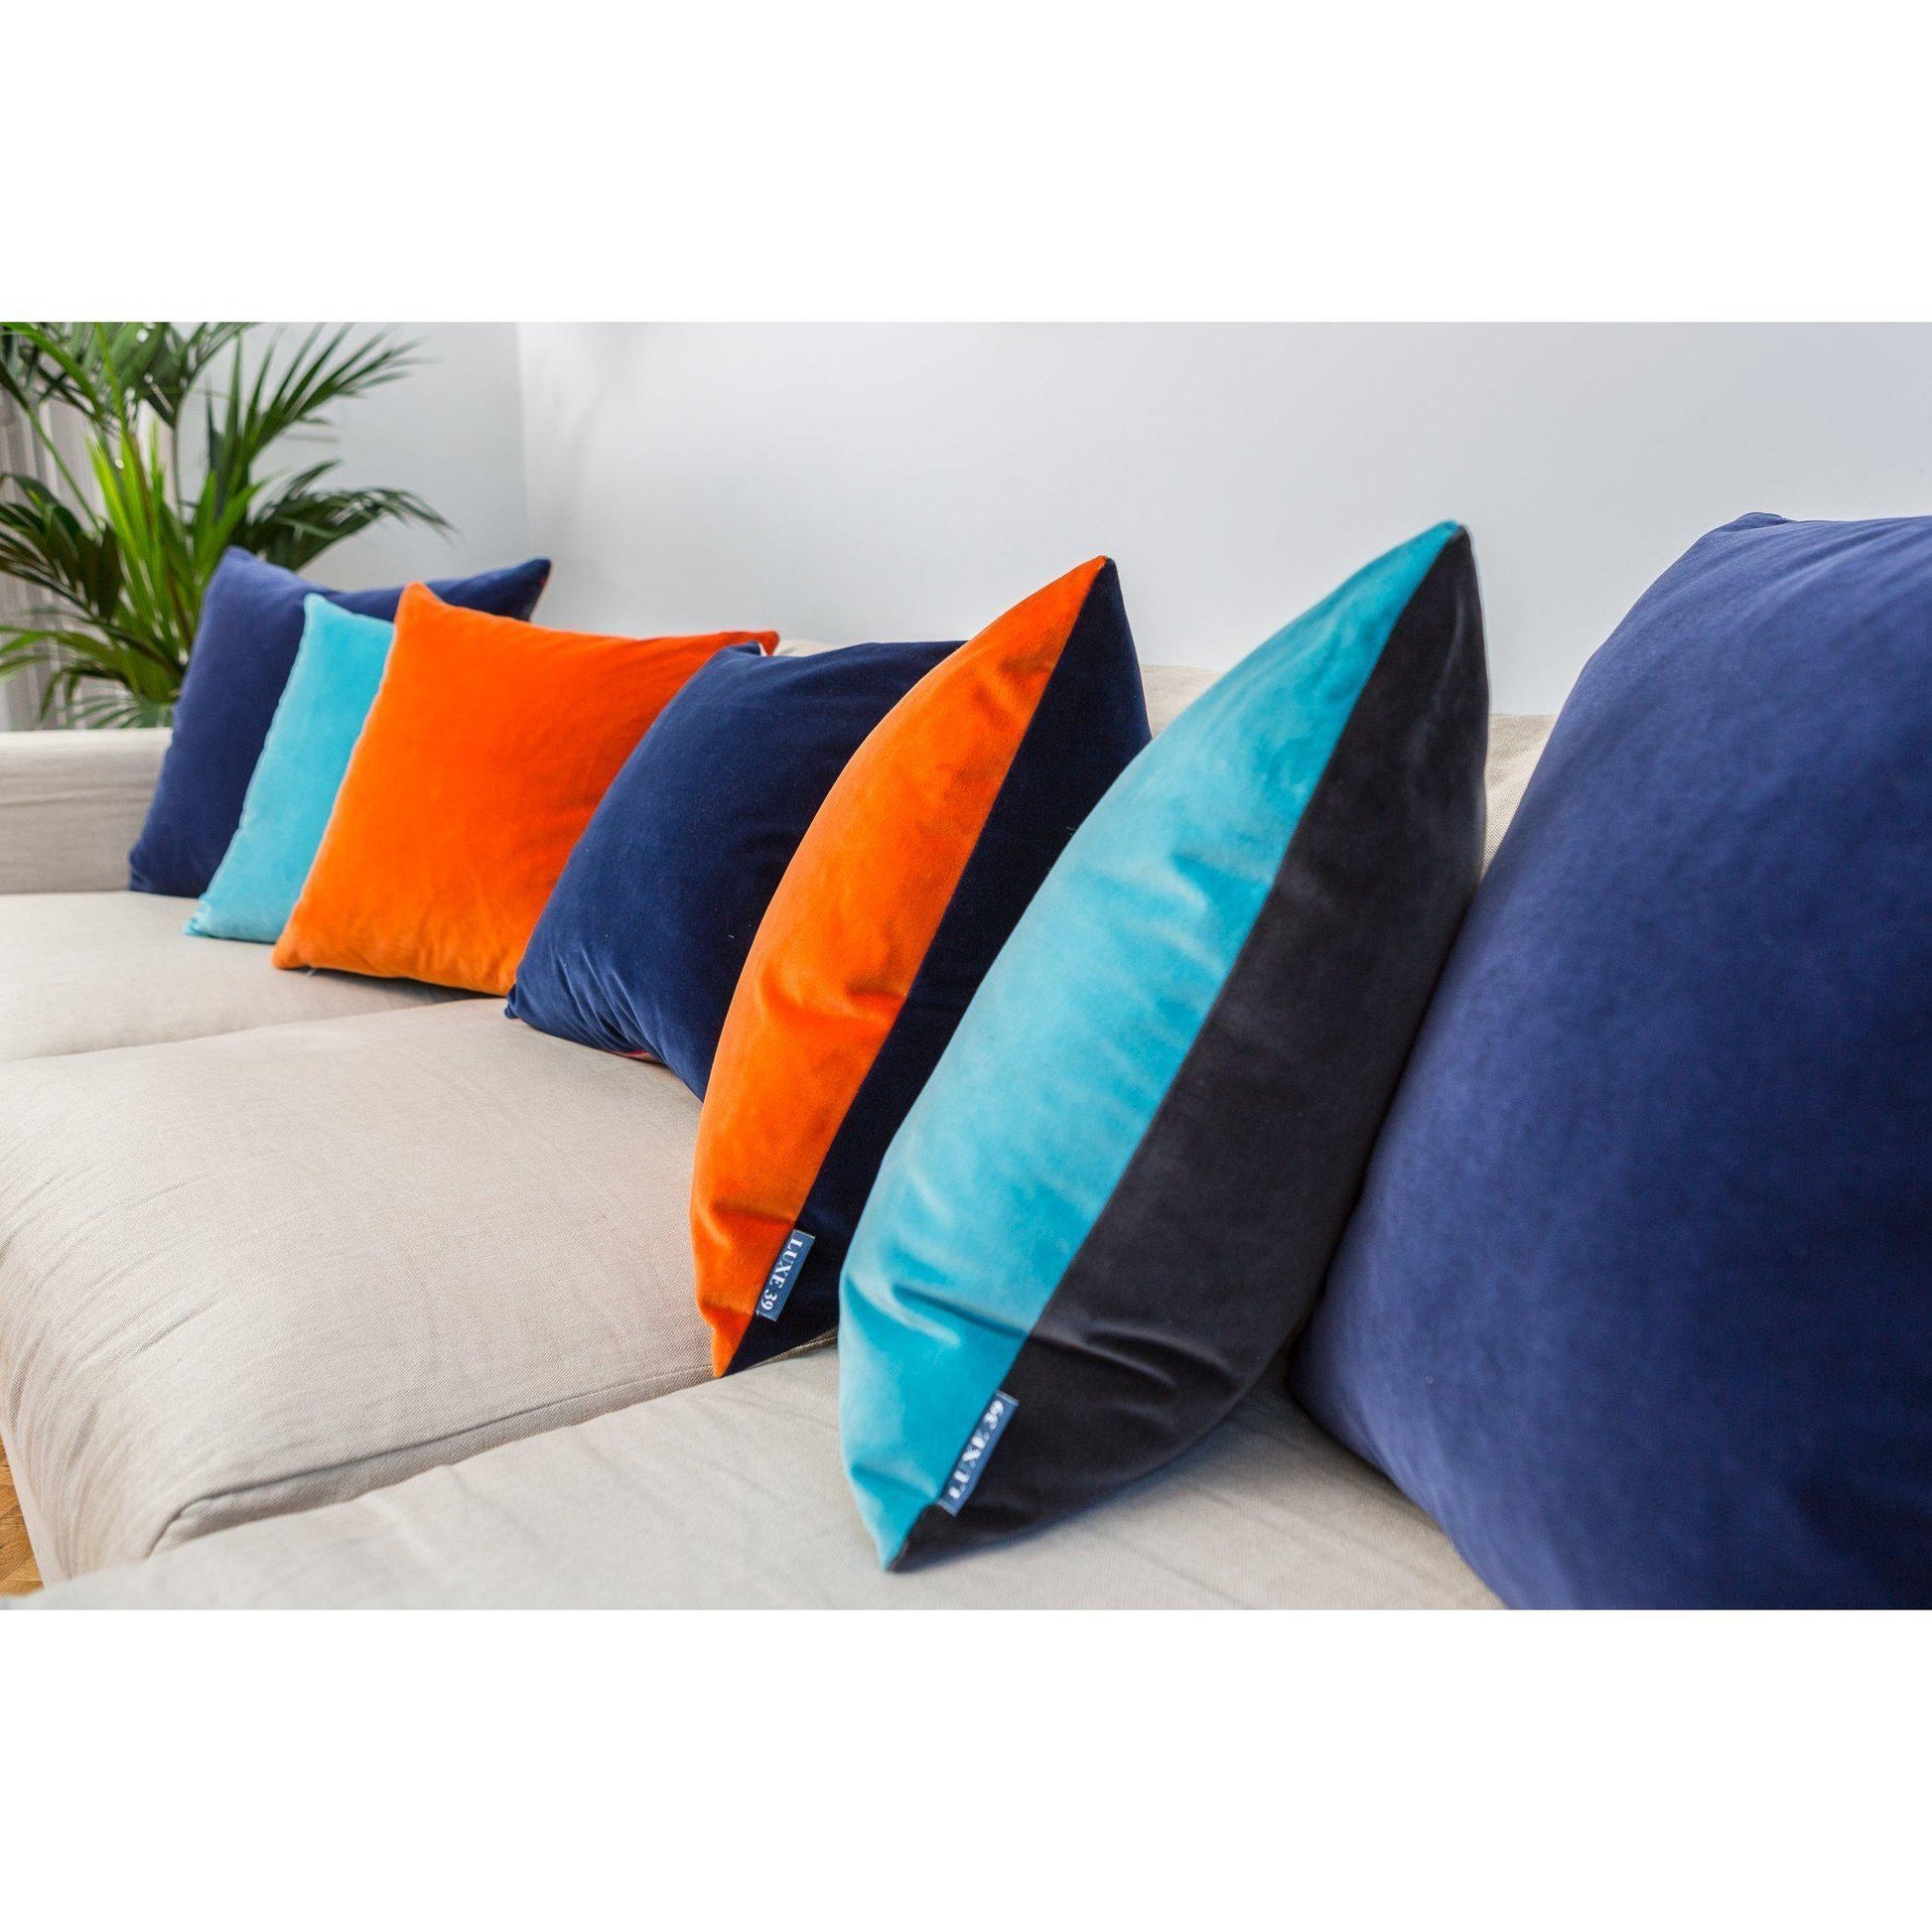 True Blue Velvet Cushion with Turquoise Luxe 39